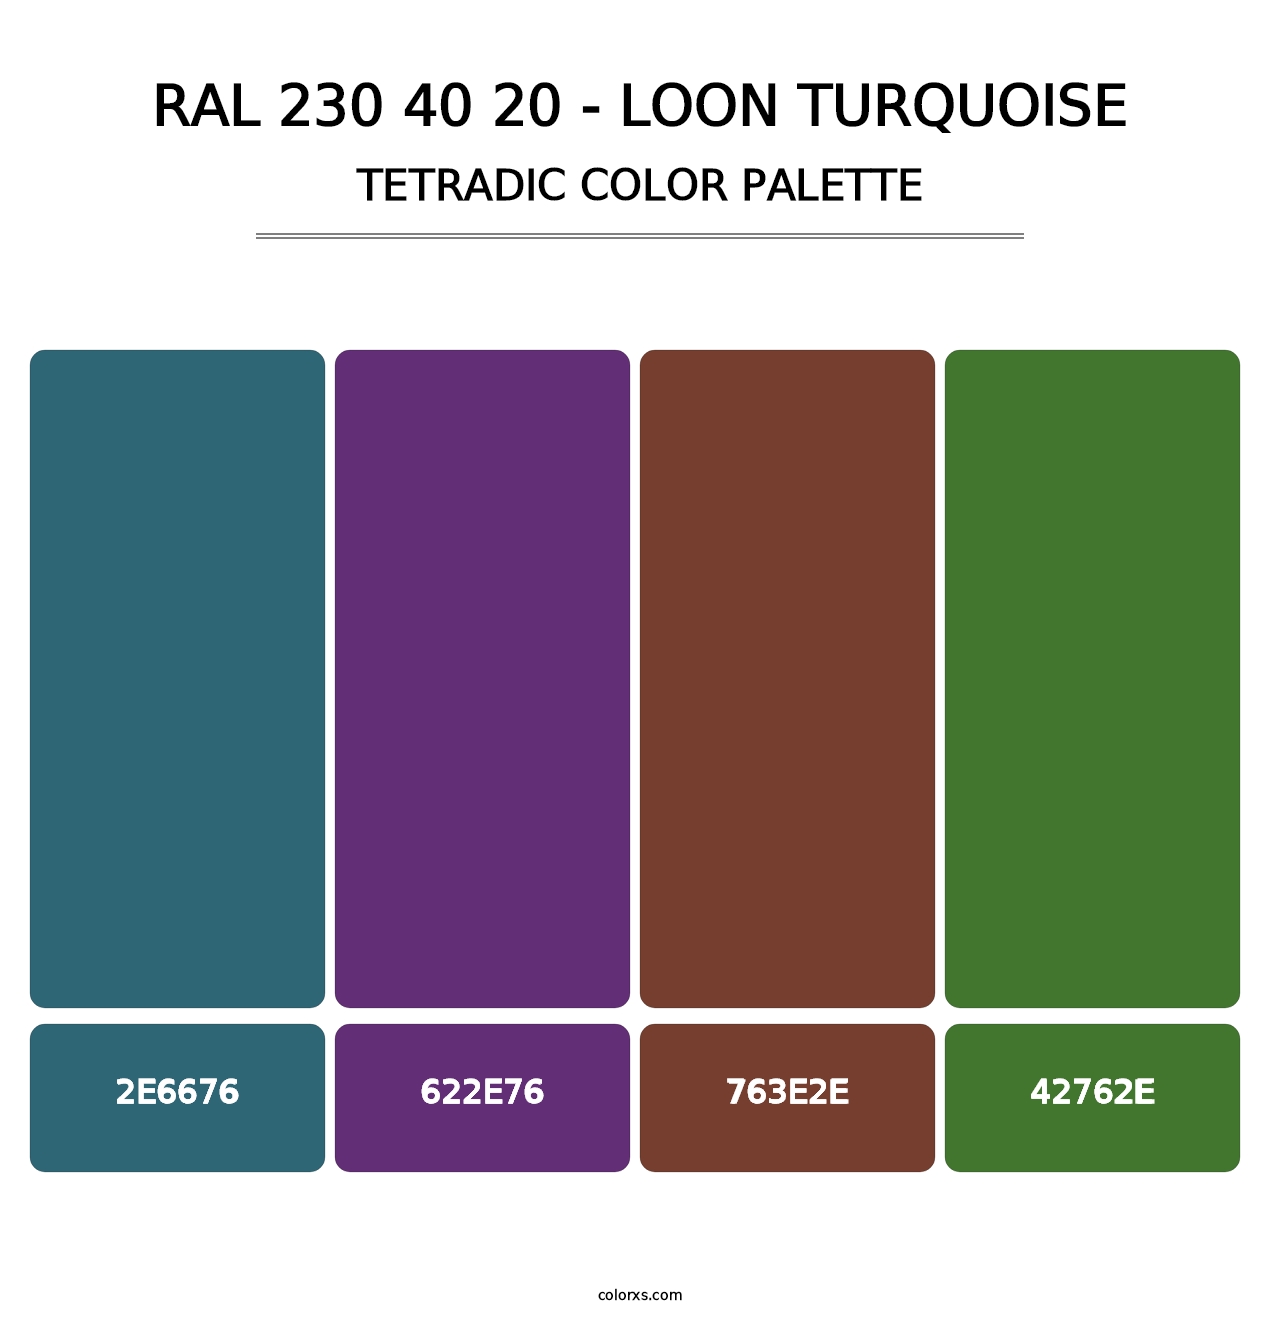 RAL 230 40 20 - Loon Turquoise - Tetradic Color Palette